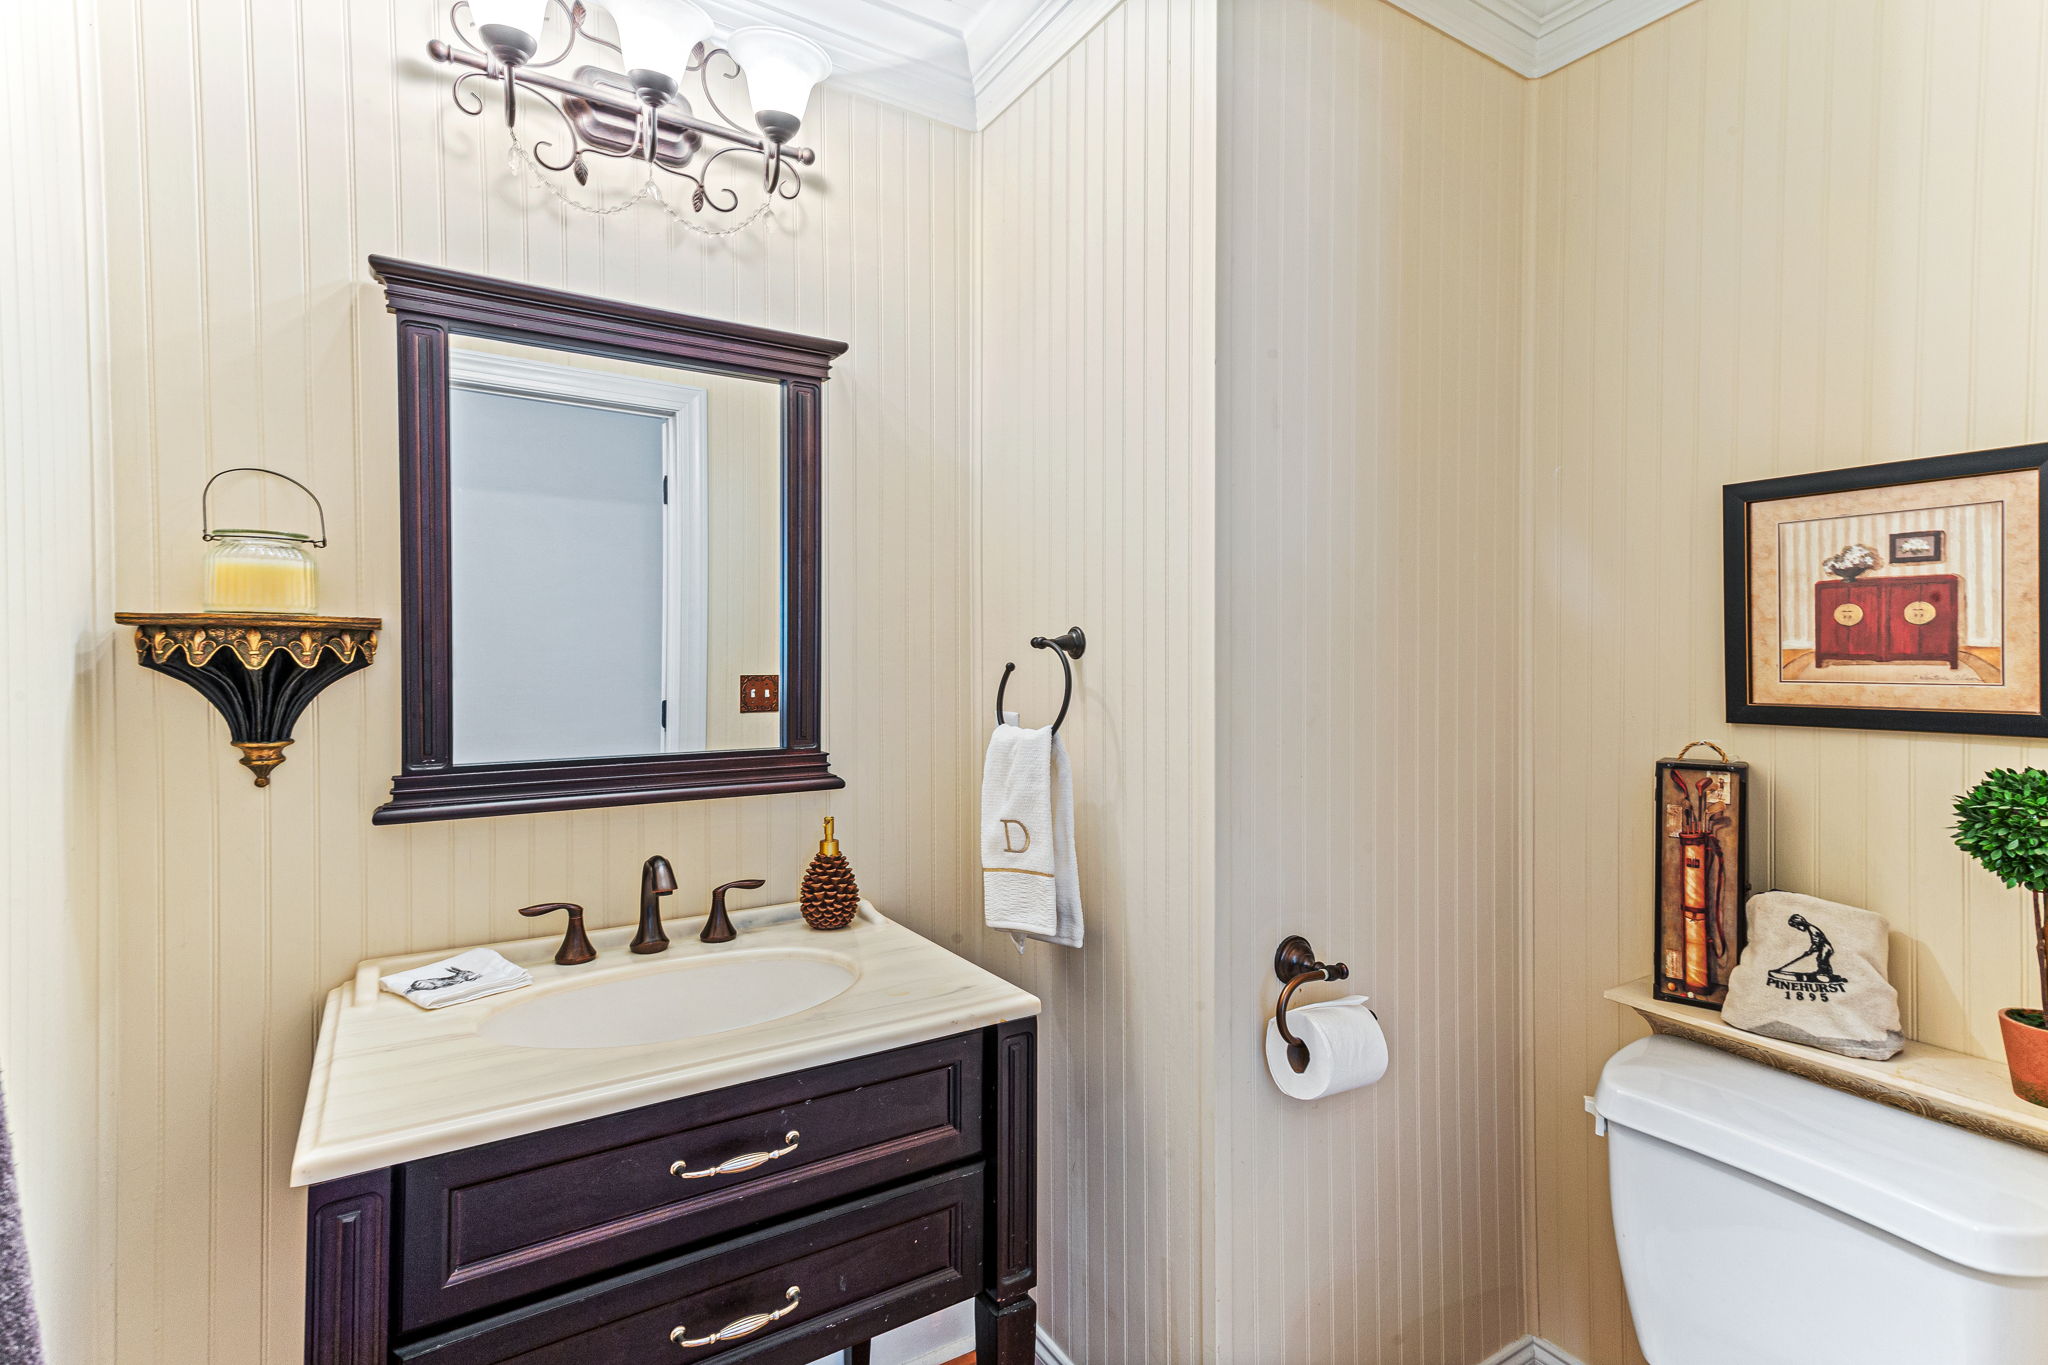 Powder room with custom molding and trim.